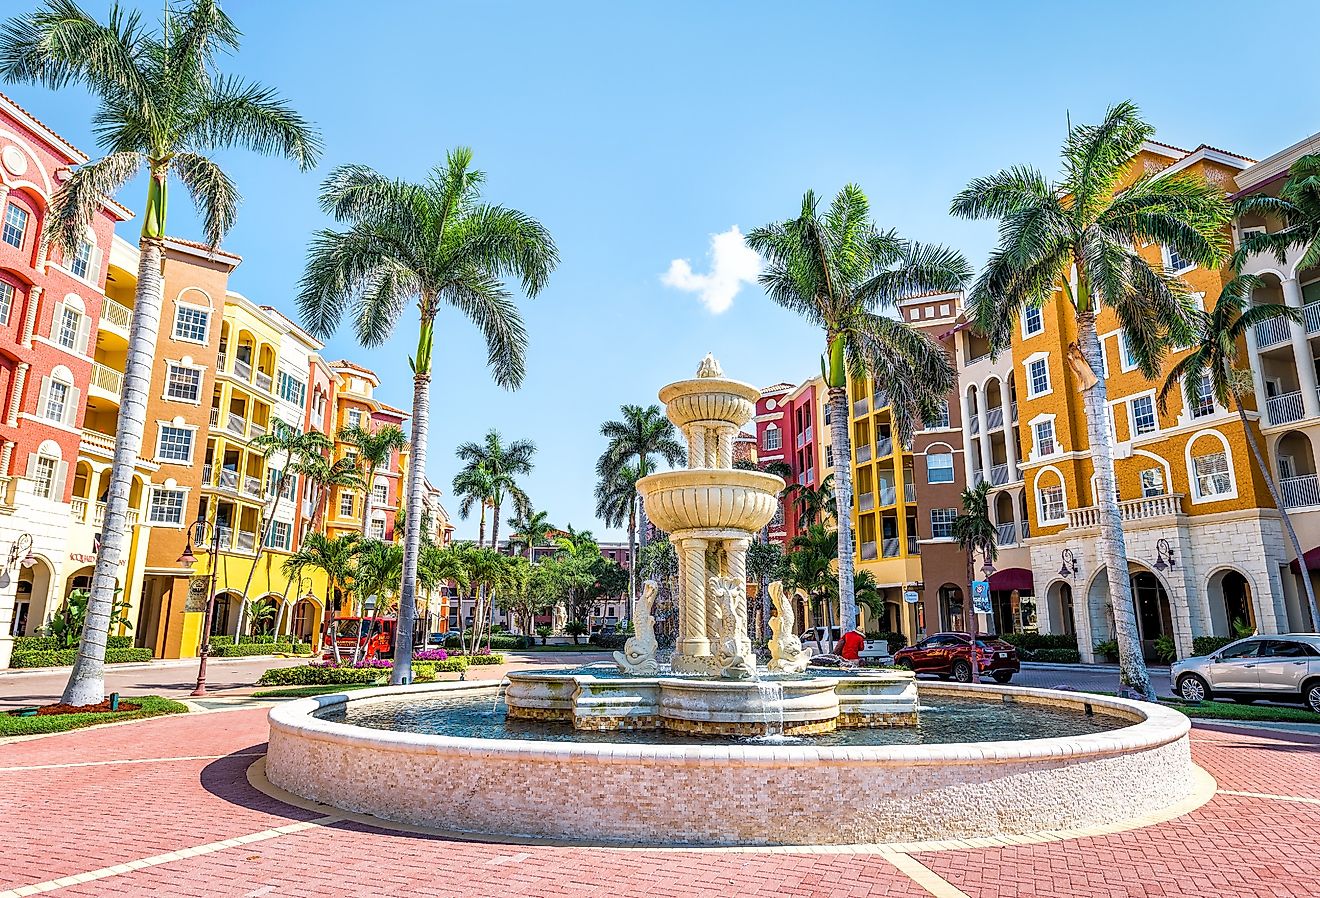 Colorful bayfront condos, with fountain, and palm trees in Naples, Florida. Image credit Andriy Blokhin via Shutterstock